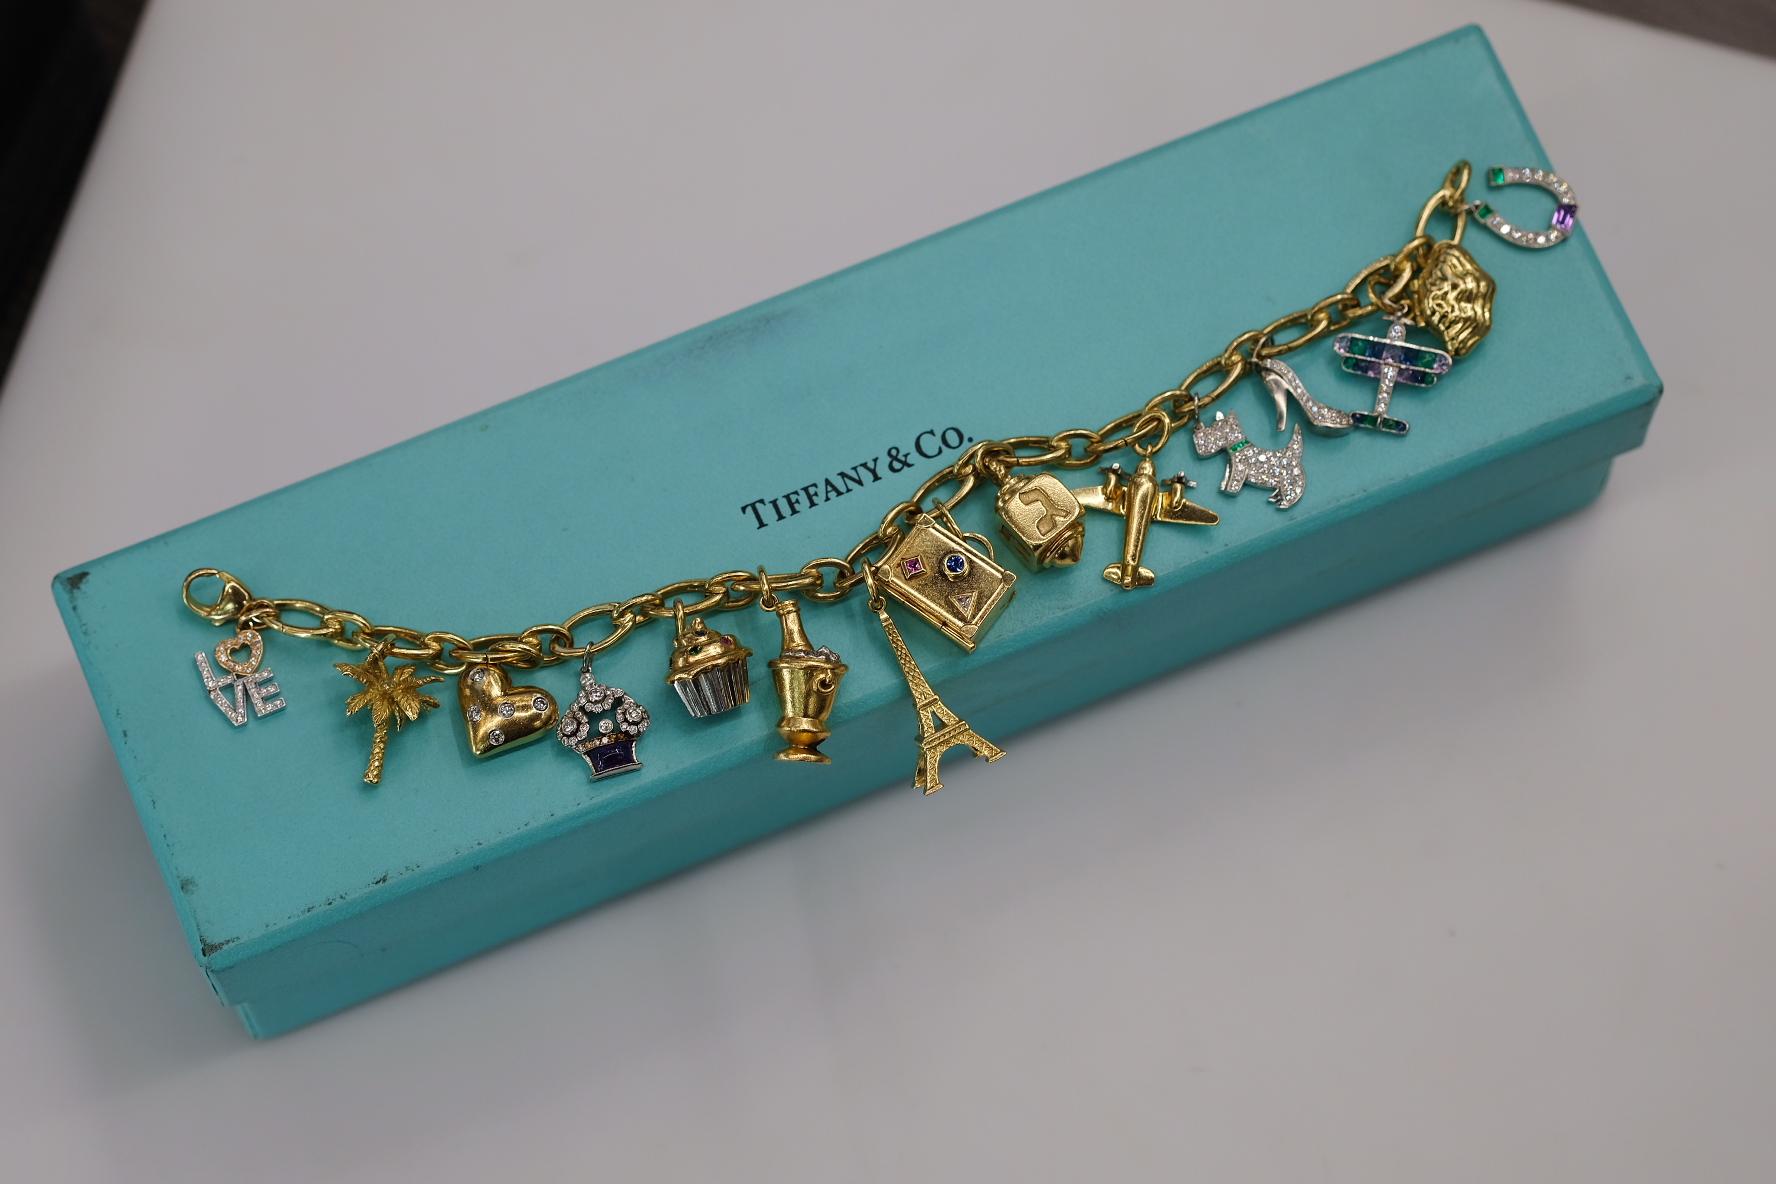 Tiffany & Co. Platinum & 18K Yellow Gold Gemset And Diamond Charm Bracelet In Excellent Condition For Sale In New York, NY